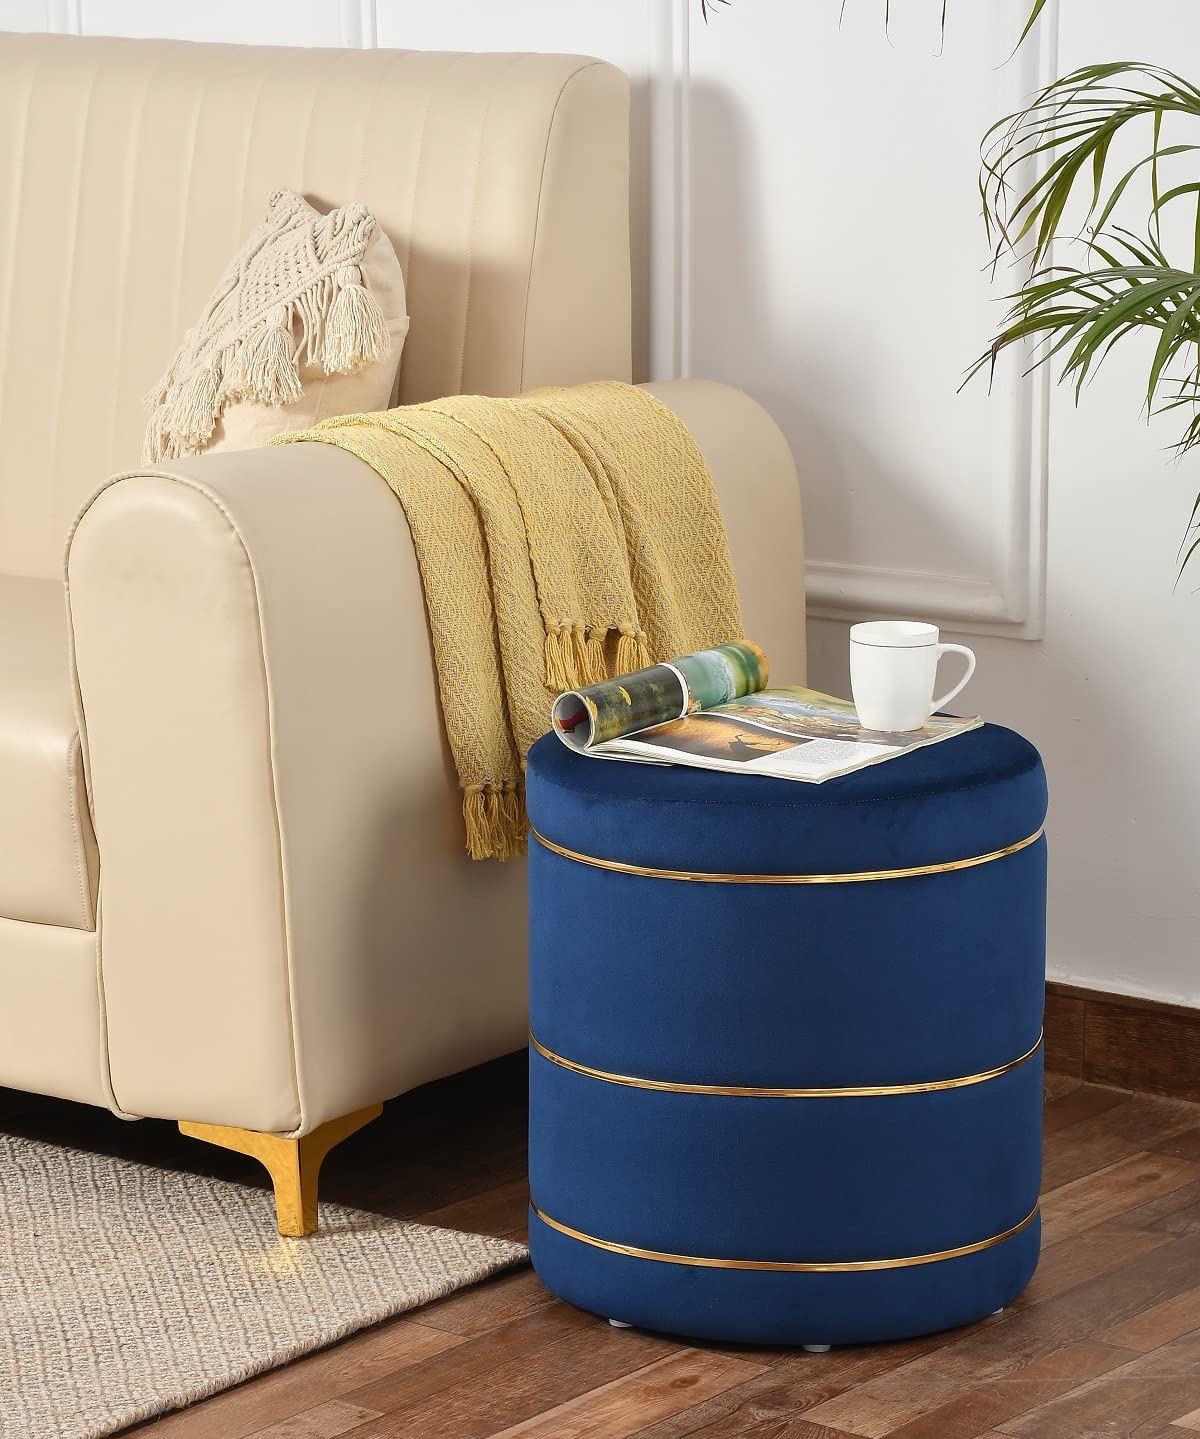 Kashyapa Rugs Collection - Presents Pouffes Stool for Living Room Sitting Furniture Wooden (Fabric Holland) Puffy Stool Footrest Footstool Pouf for Home Decor, Dressing Table Stool Colour Blue